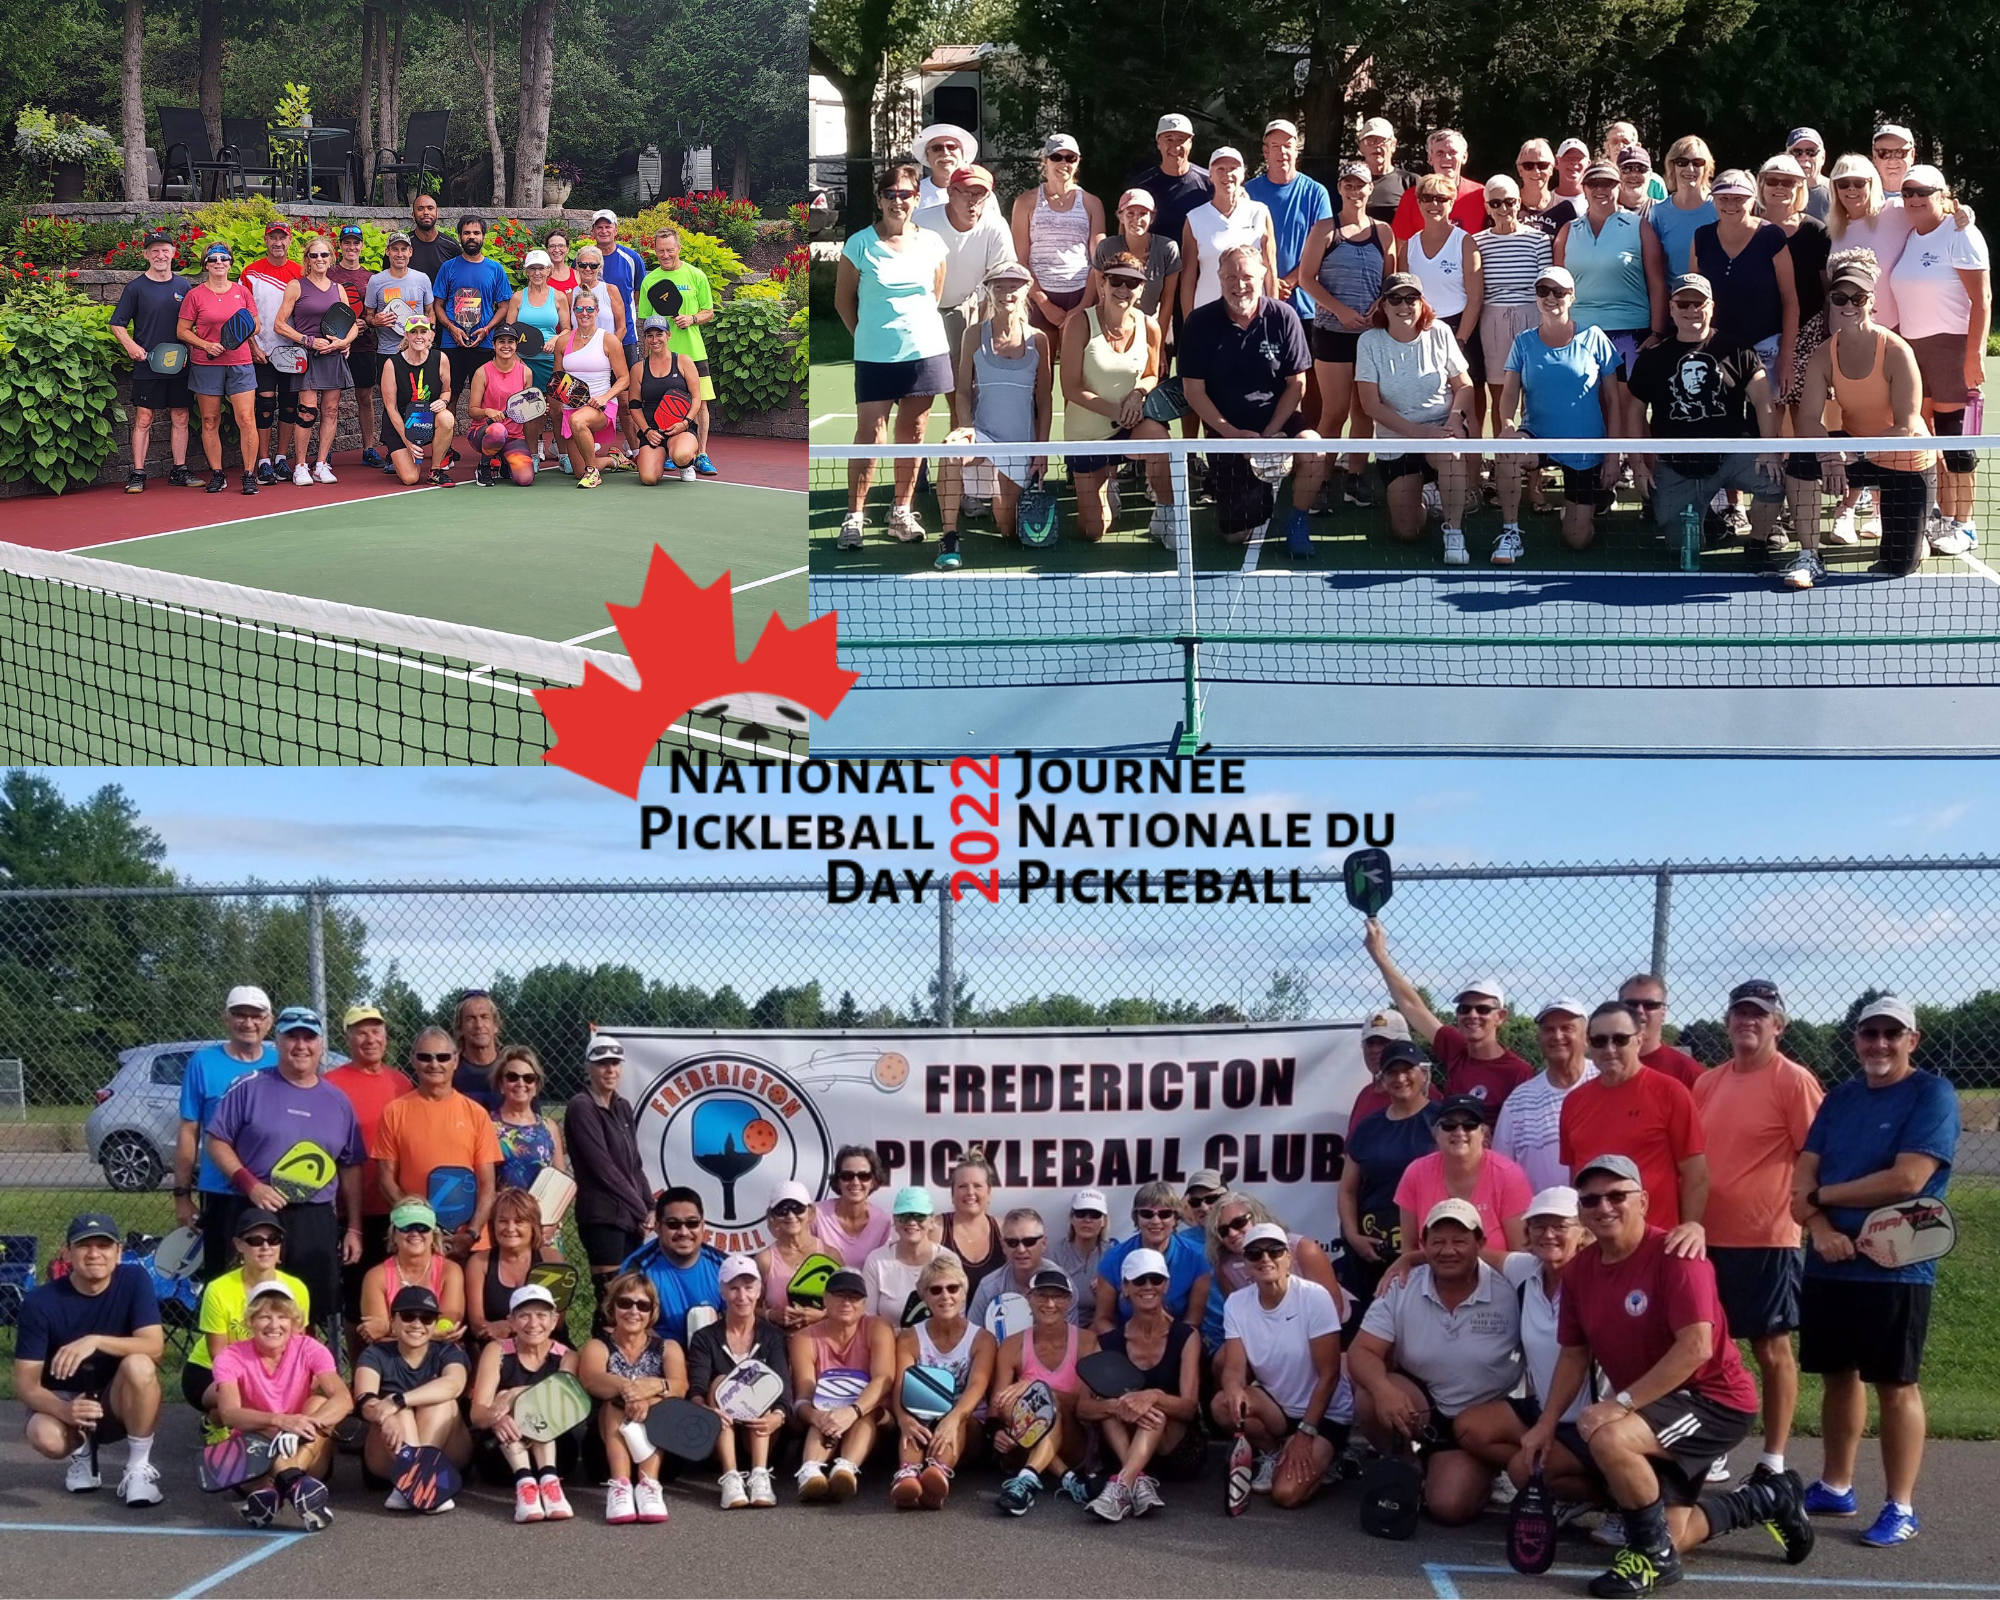 A Review of National Pickleball Day 2022